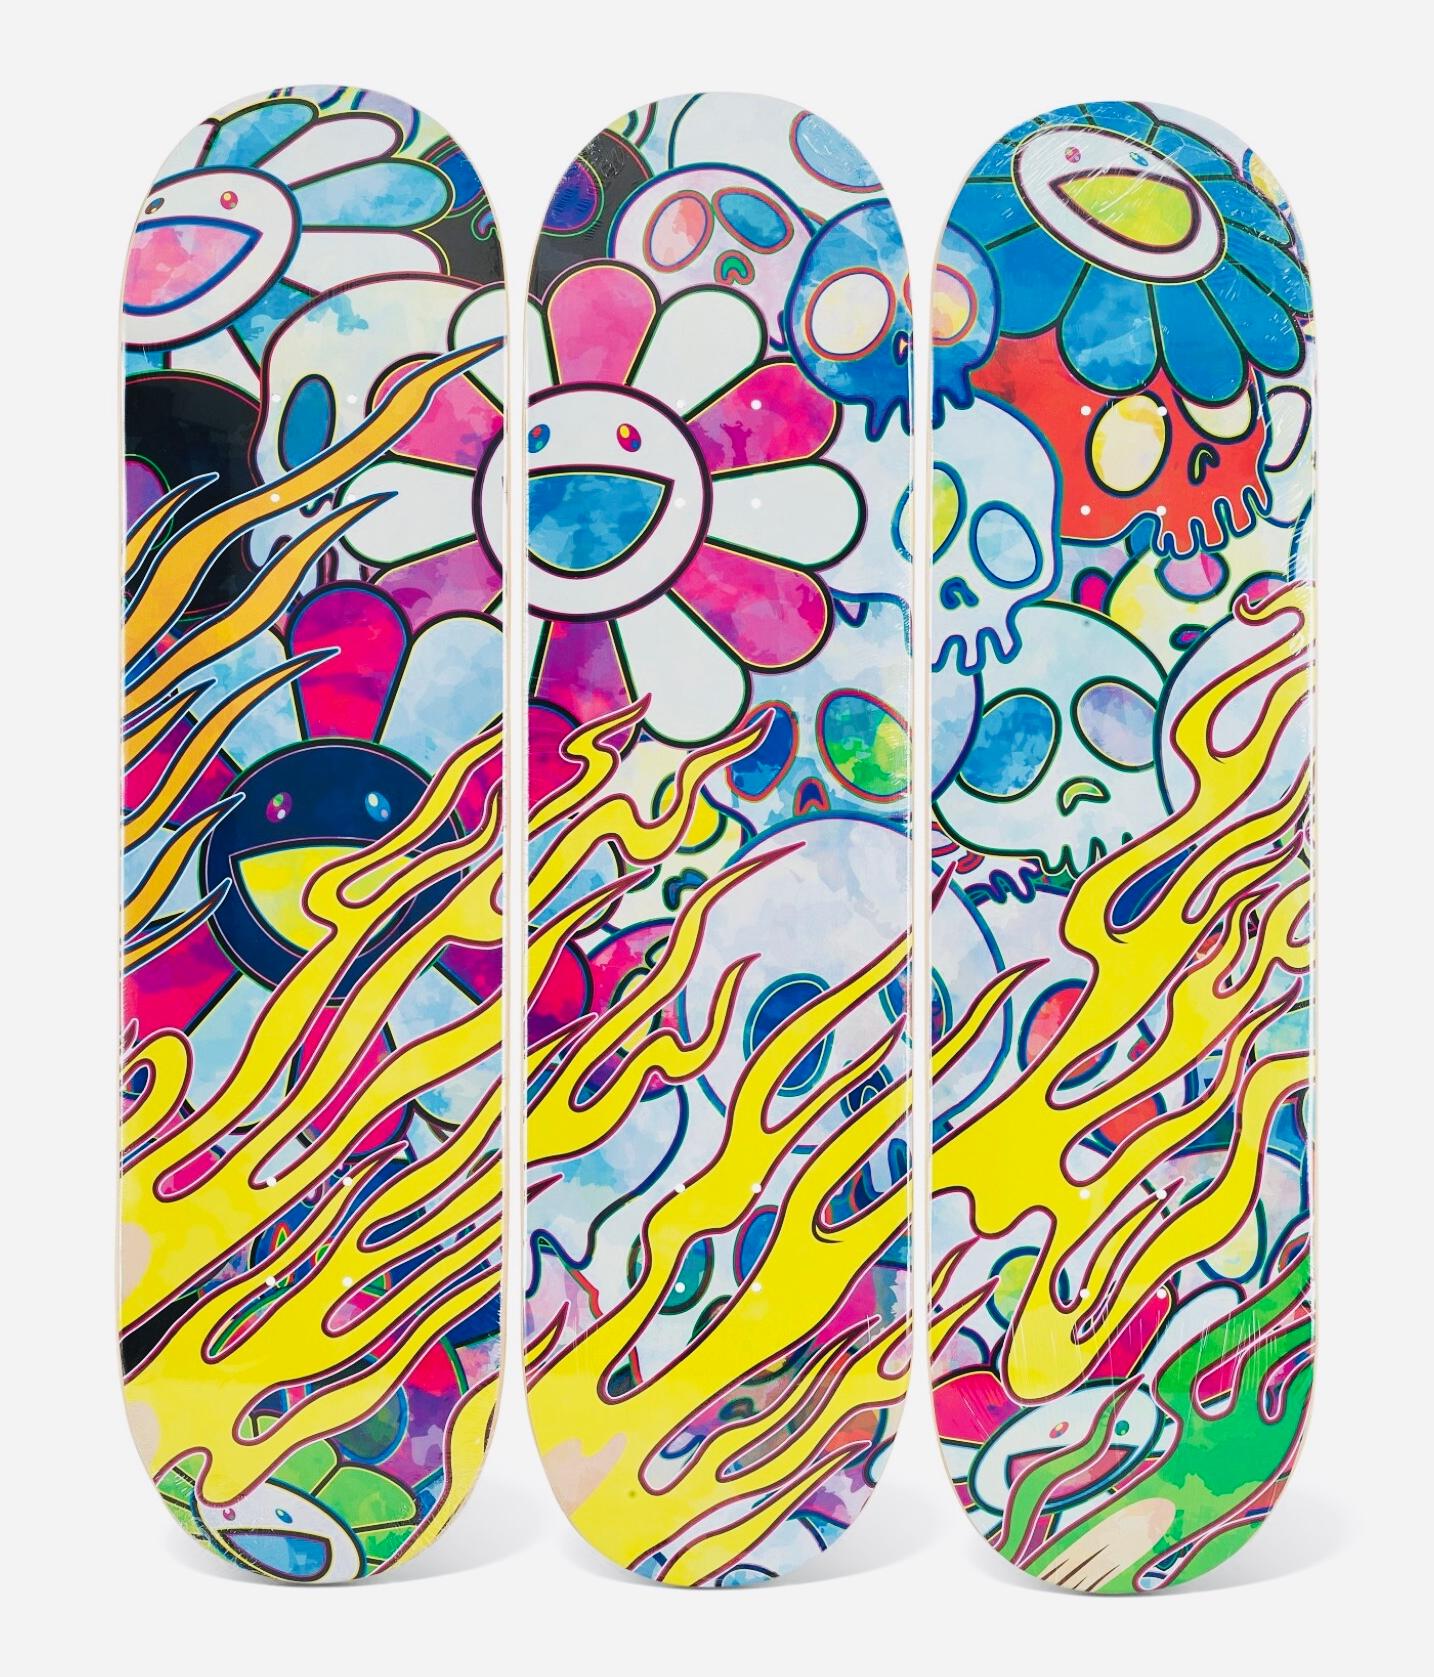 Set of 3 Takashi Murakami Skateboard Decks 2018:
A standout triptych of Takashi Murakami skate decks produced as a limited series. A brilliant set that makes for vibrant one of a kind wall-art that hangs with ease. 

Medium: Offset print on 3 Maple